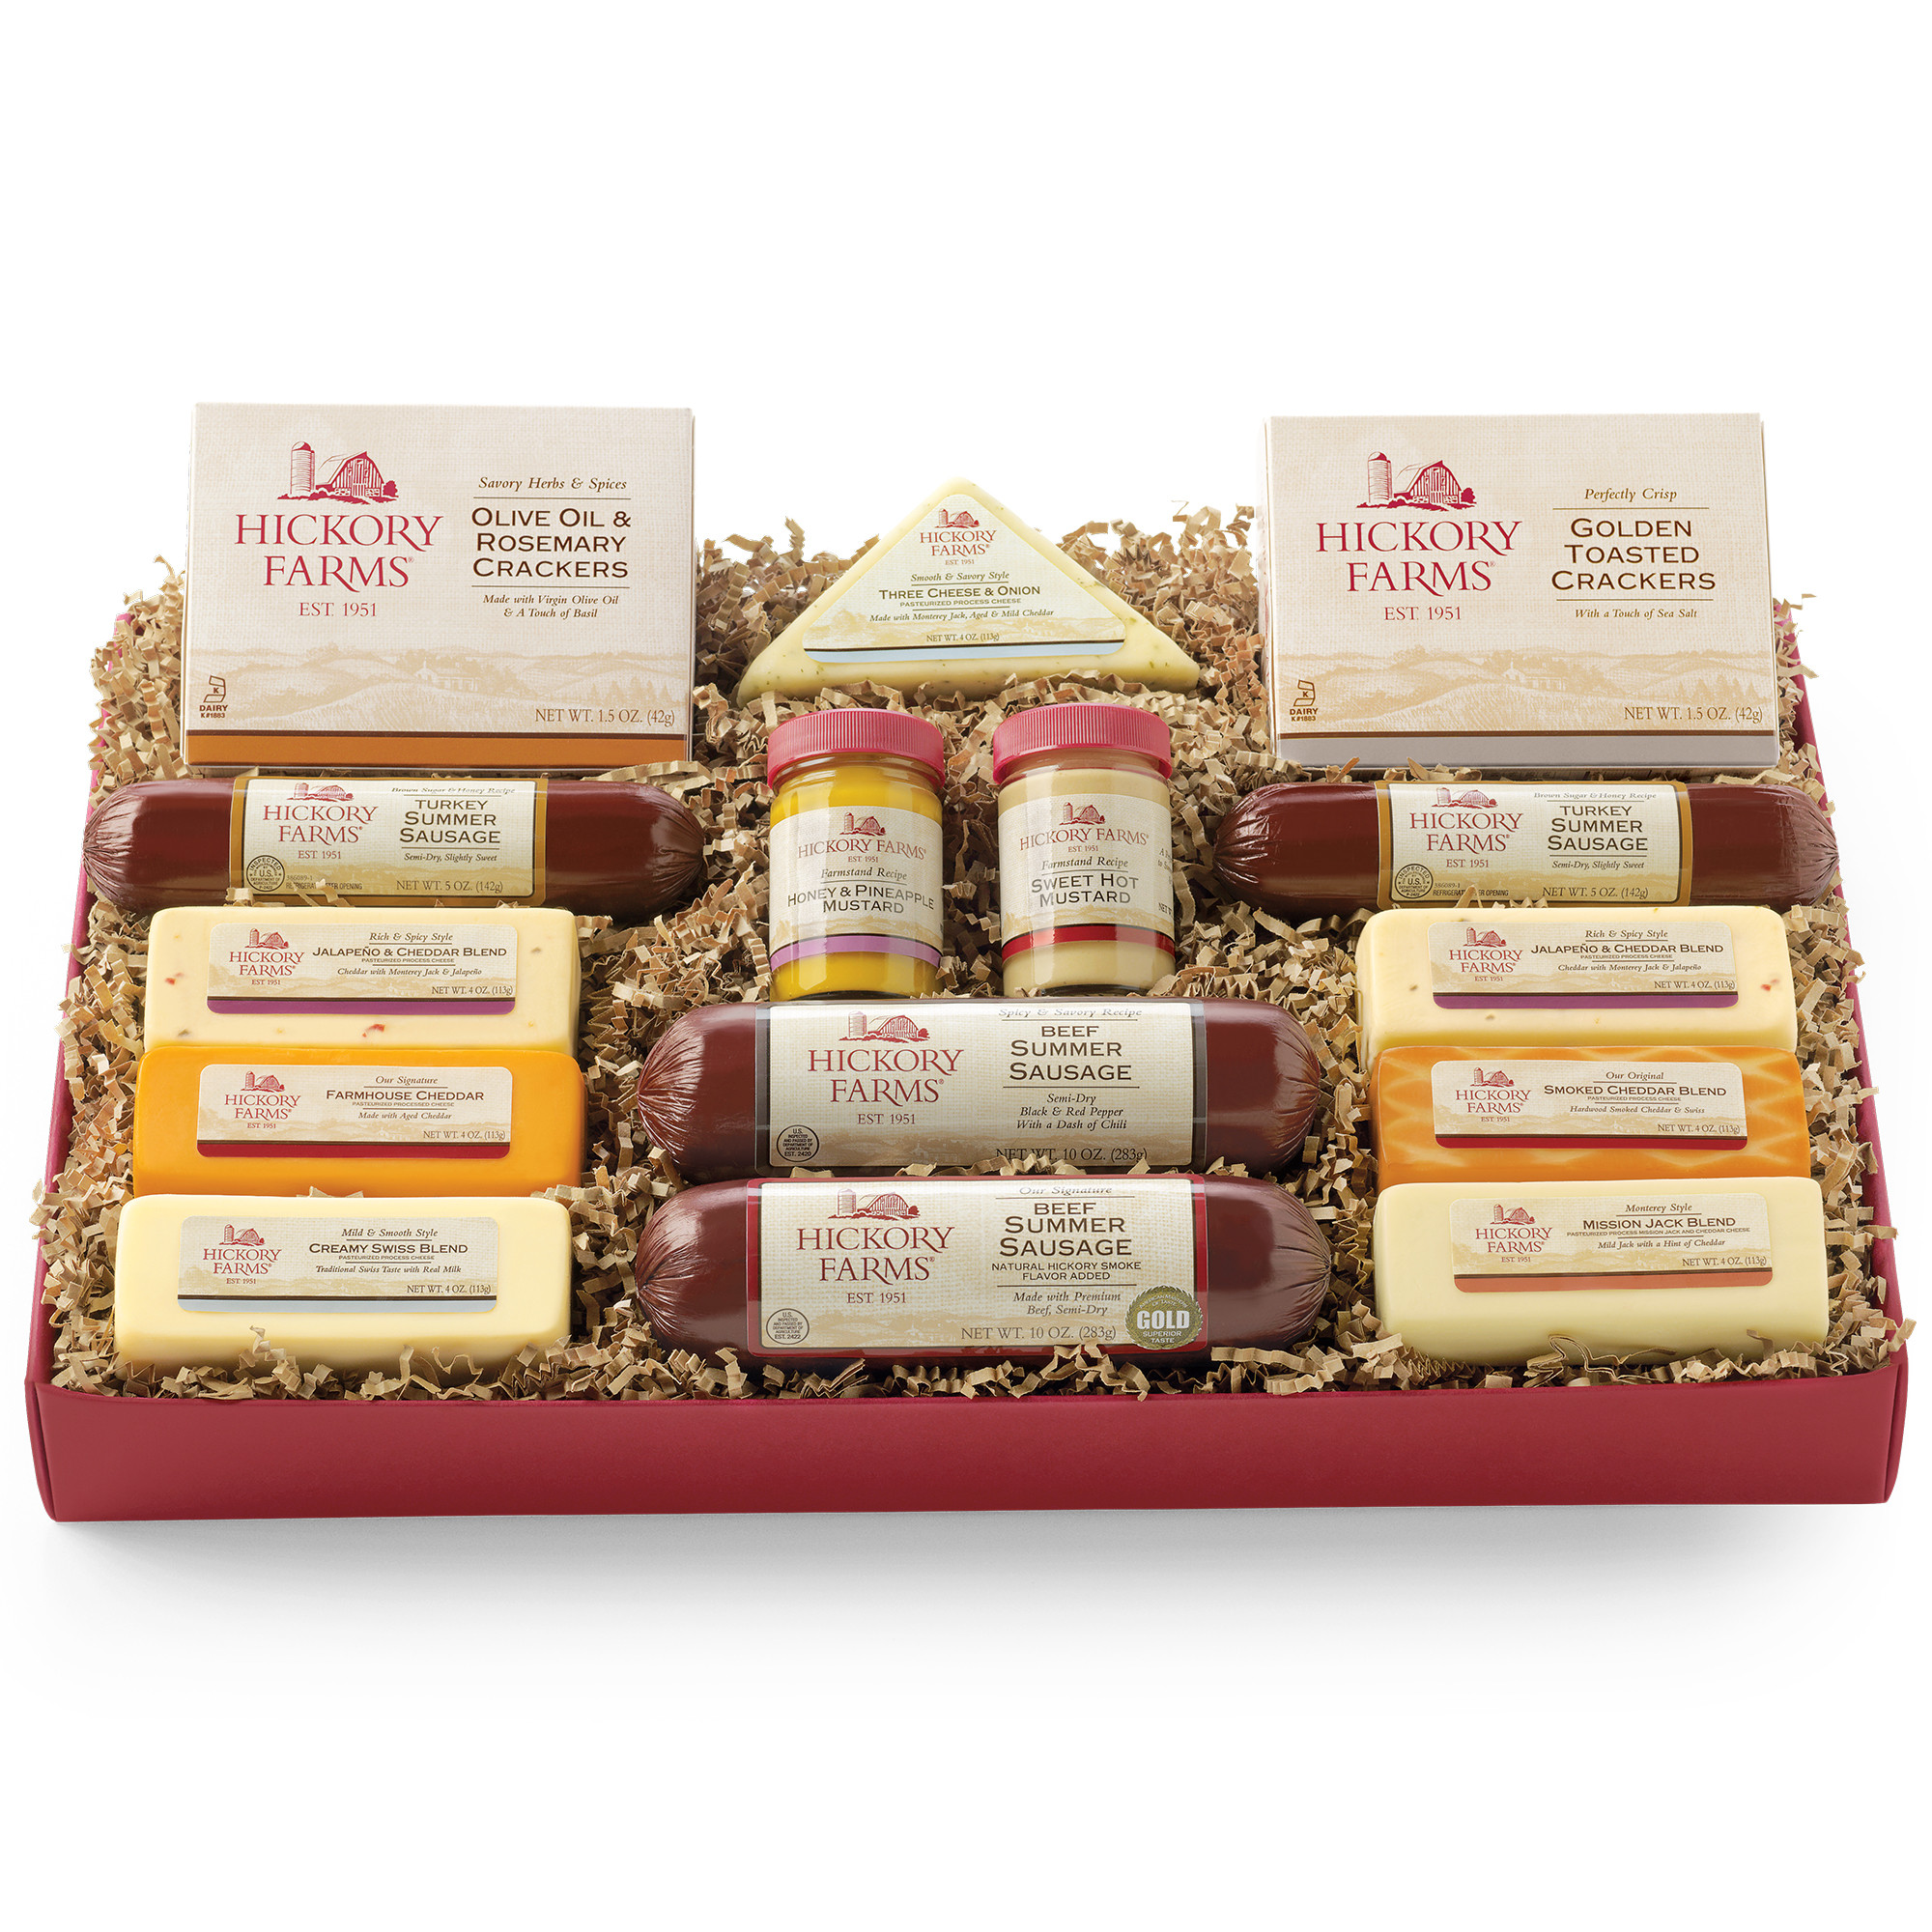 Summer Sausage And Cheese Gift Baskets
 Hickory Farms Home For the Holidays Gift Box